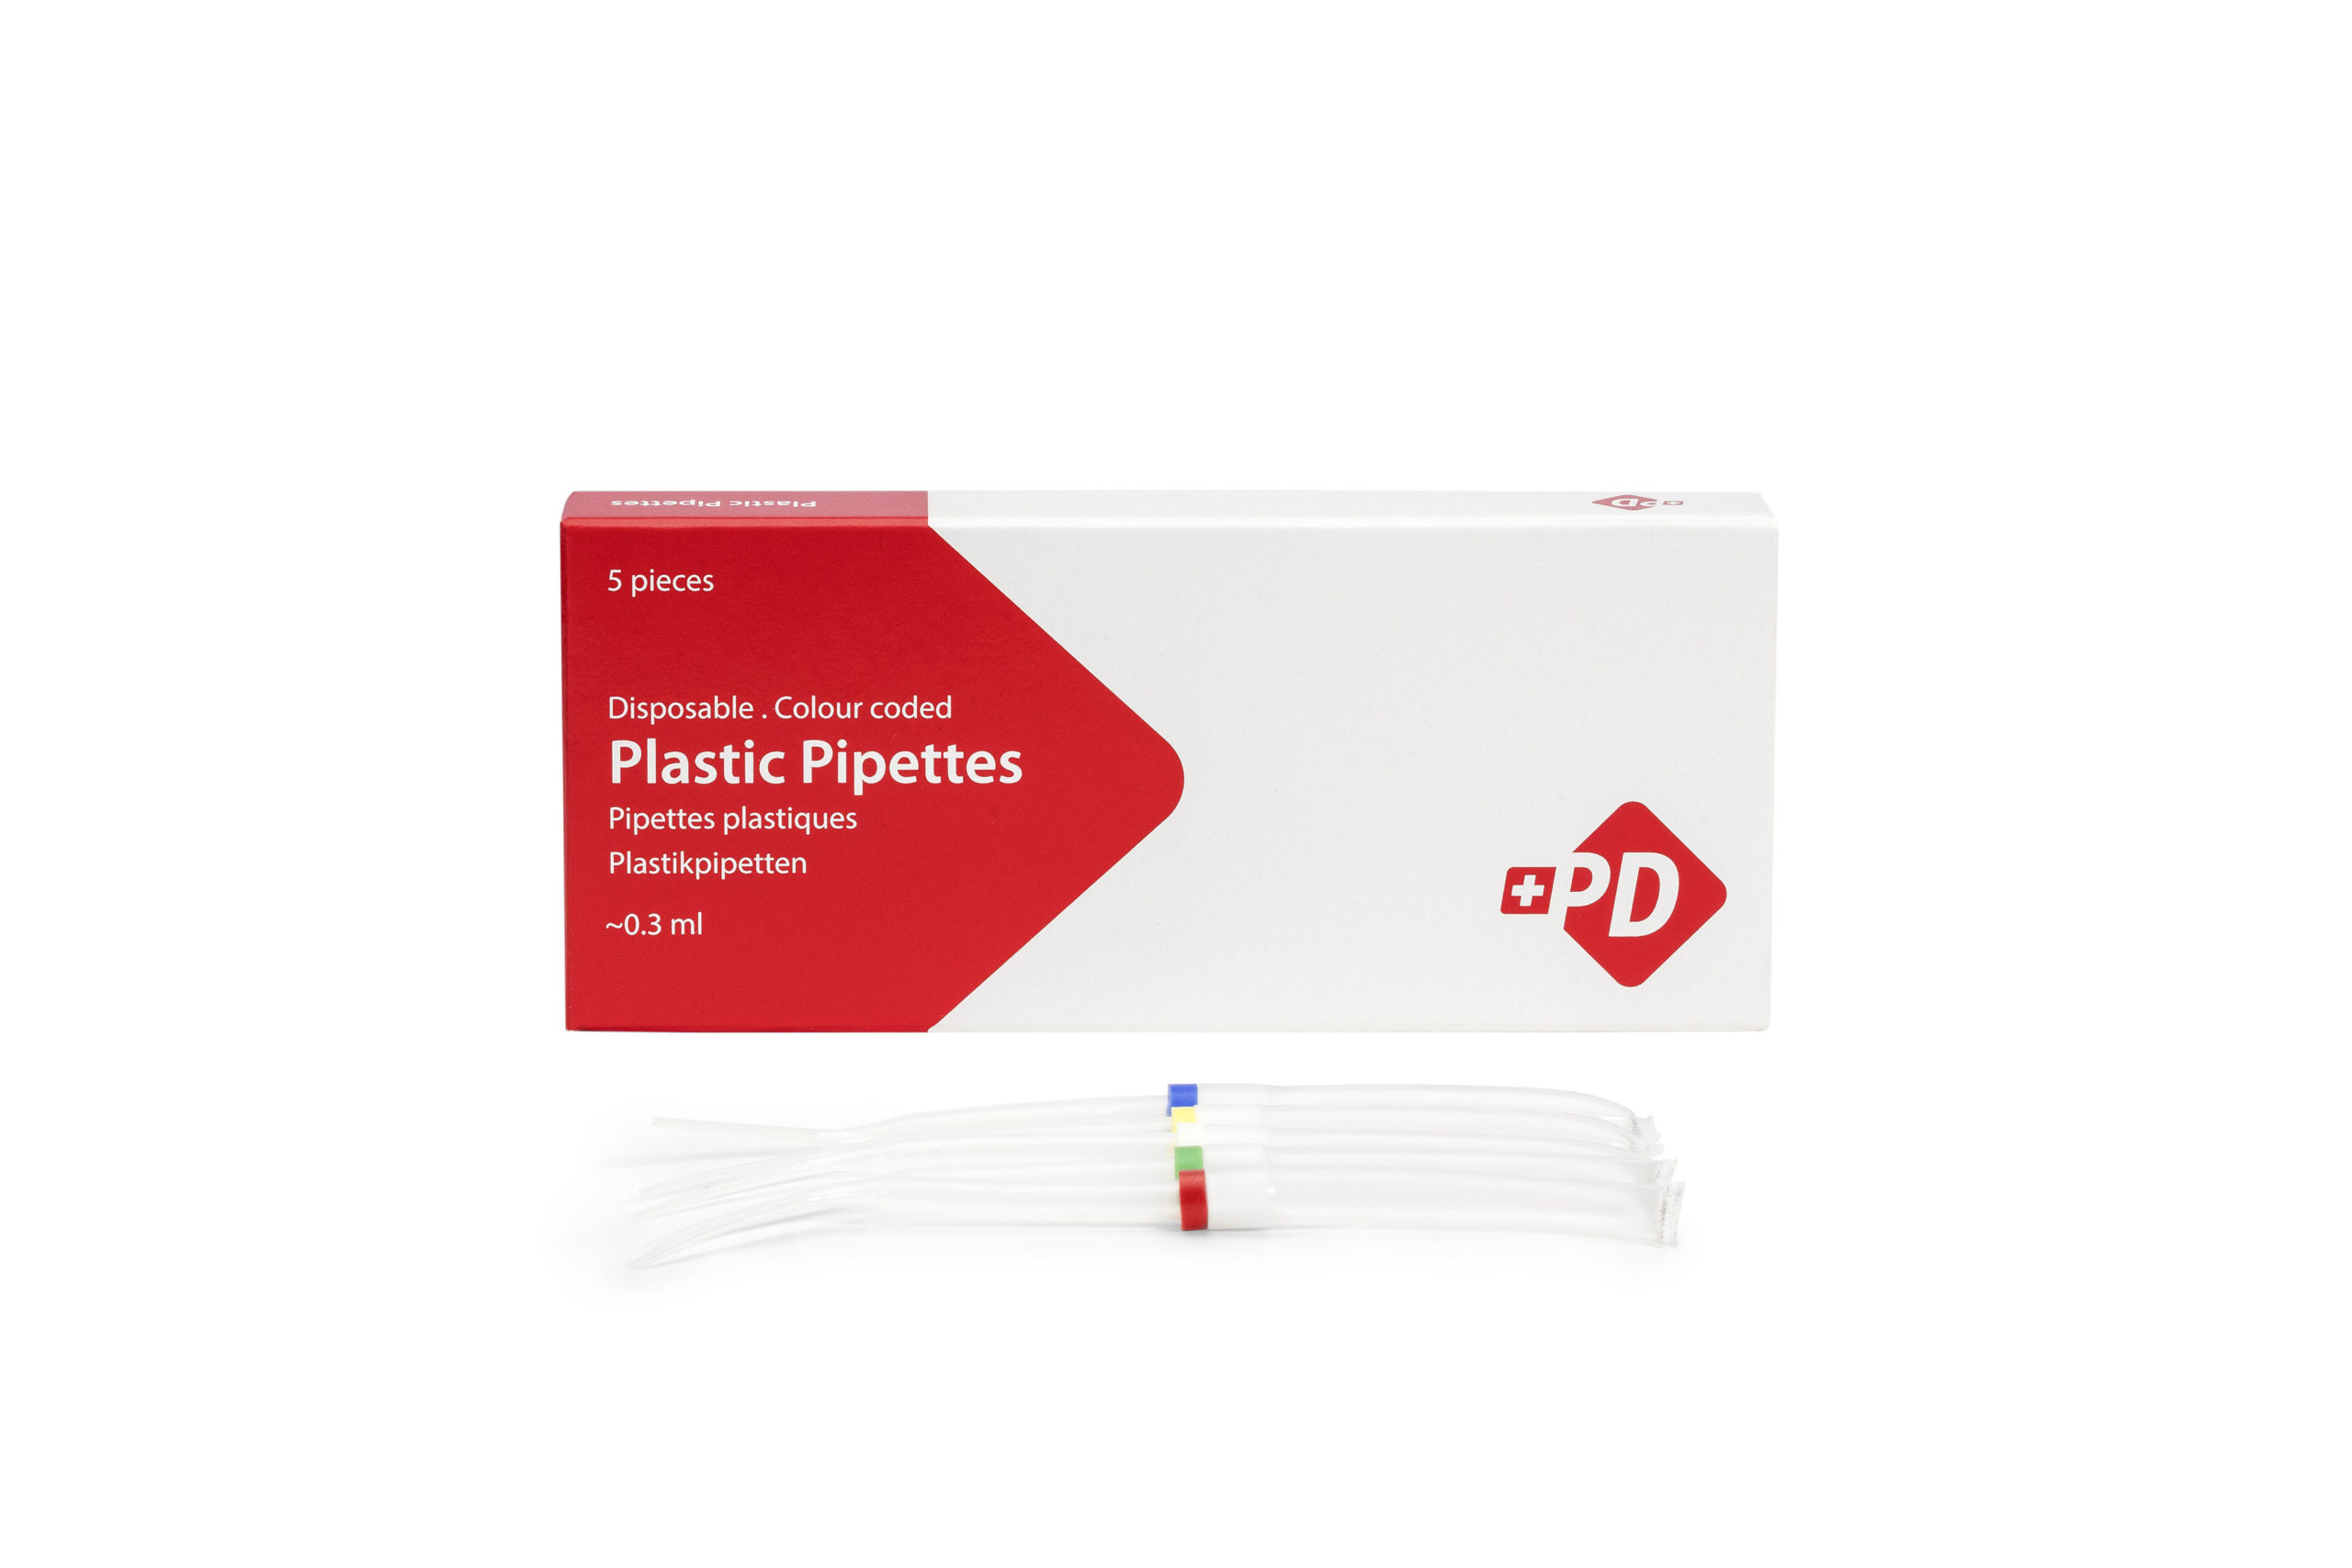 Plastic pipettes  Endodontic access cavities products by PD Dental